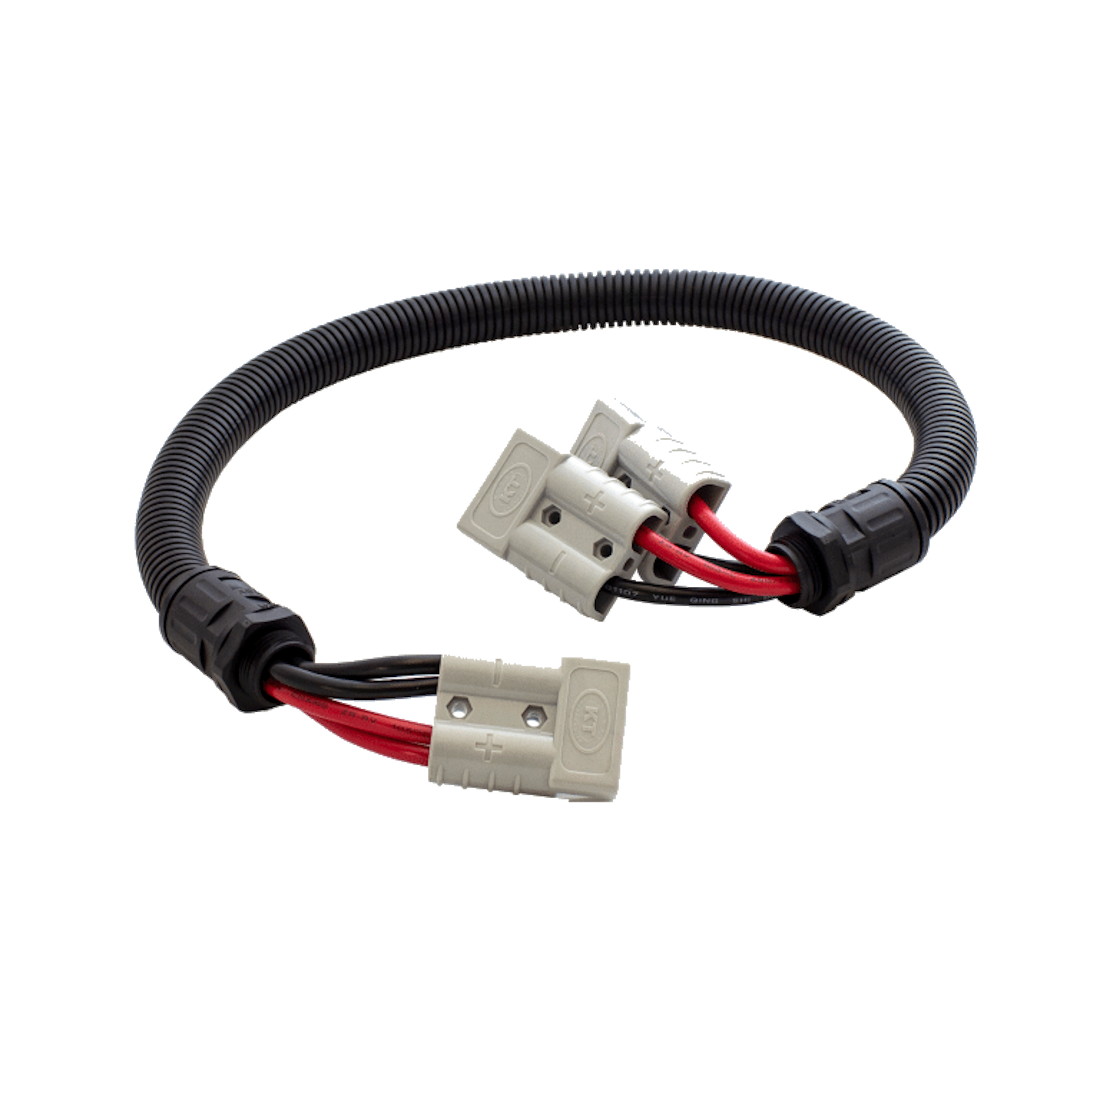 50 Amp, 12-48V Connector To Twin 50 Amp 12-48V Connectors